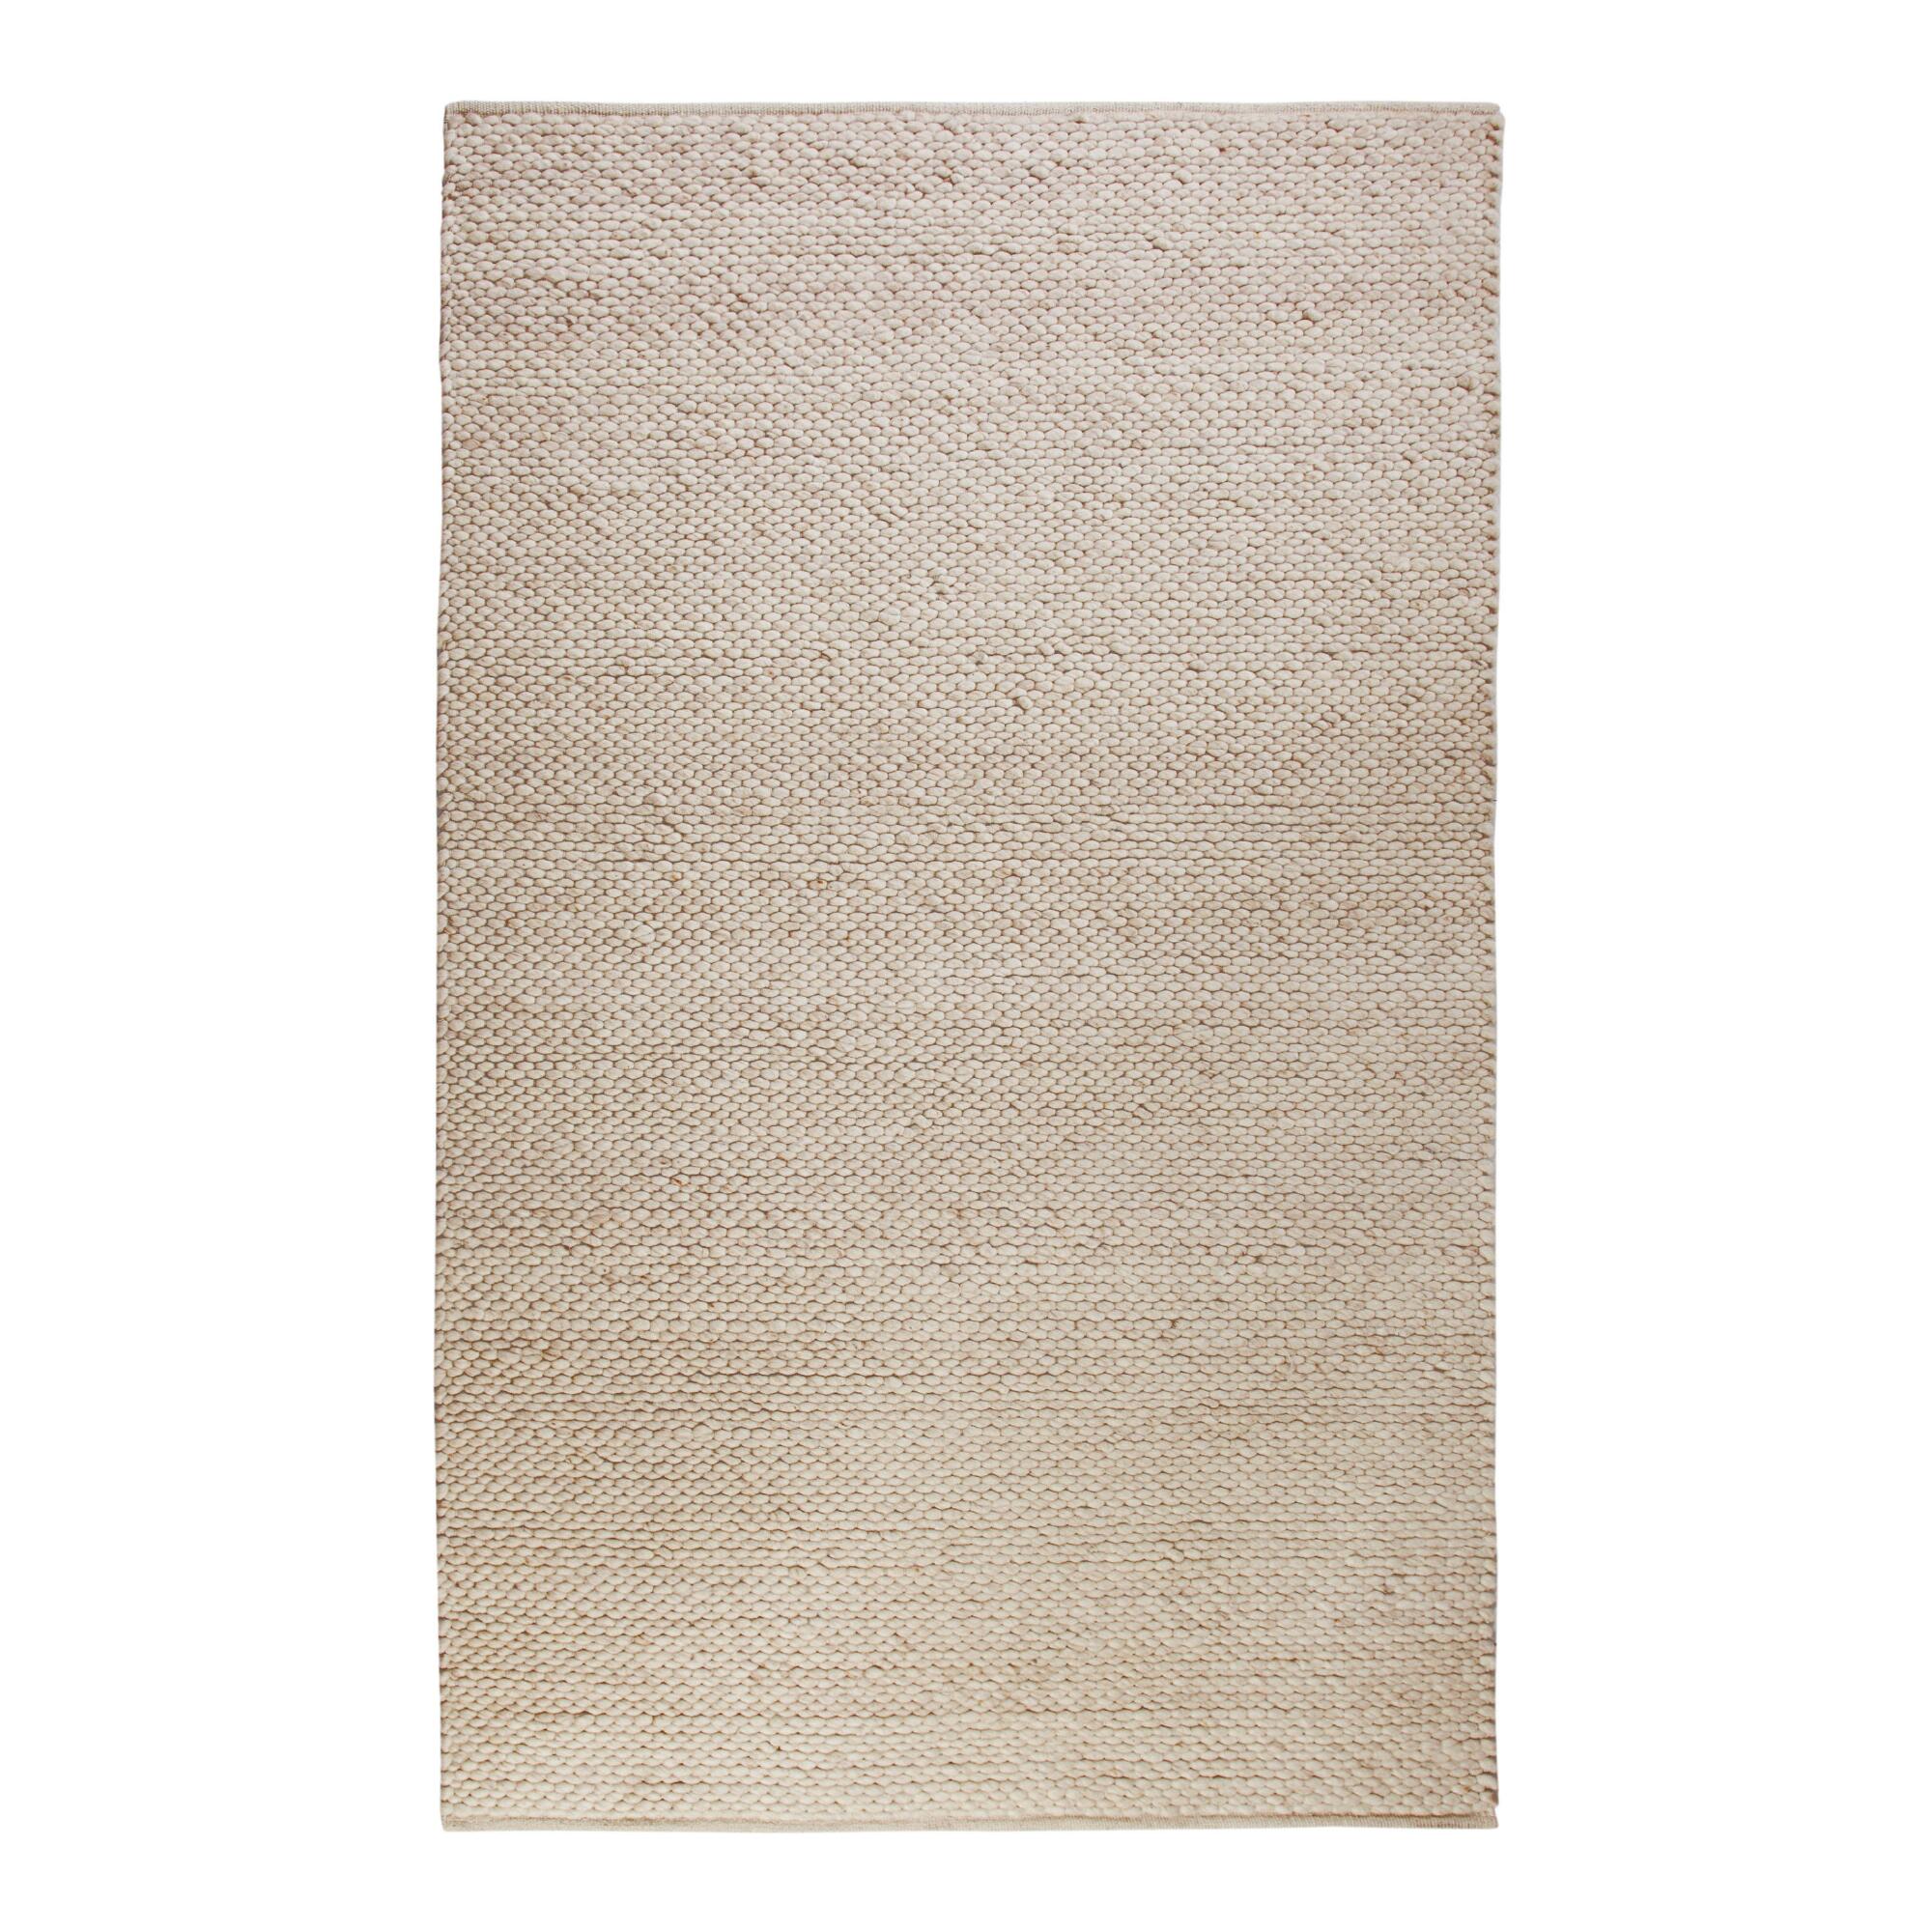 Oatmeal Sweater Wool Blend Lucas Area Rug: Natural - 8' x 10' by World Market